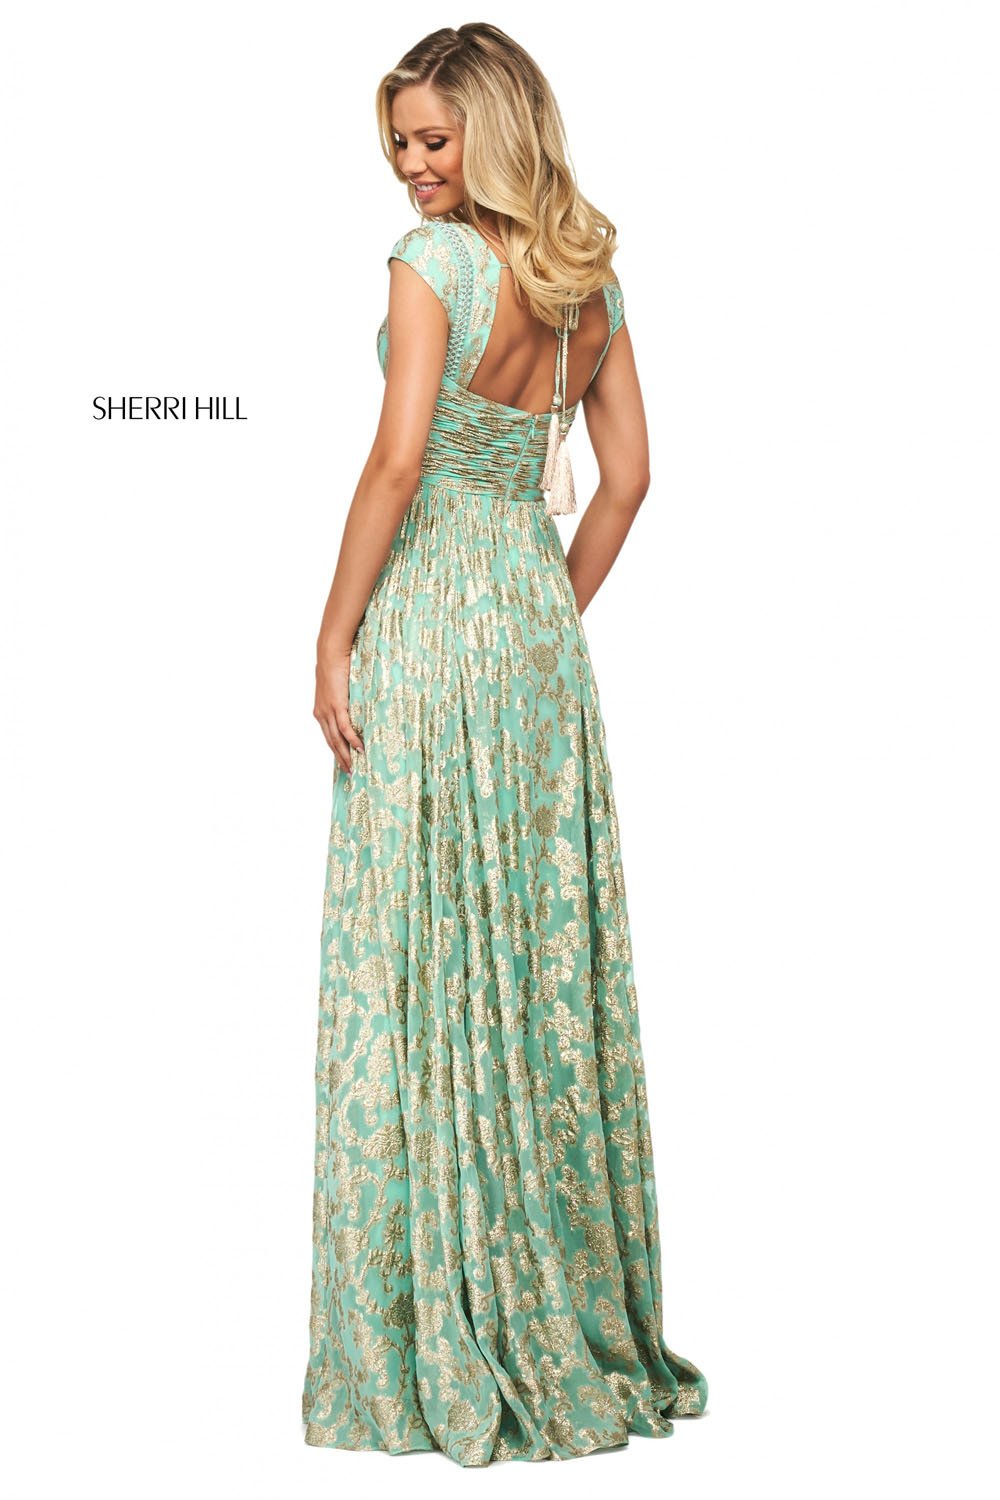 Sherri Hill 53348 dress images in these colors: Aqua Gold, Ivory Gold, Blush Gold.